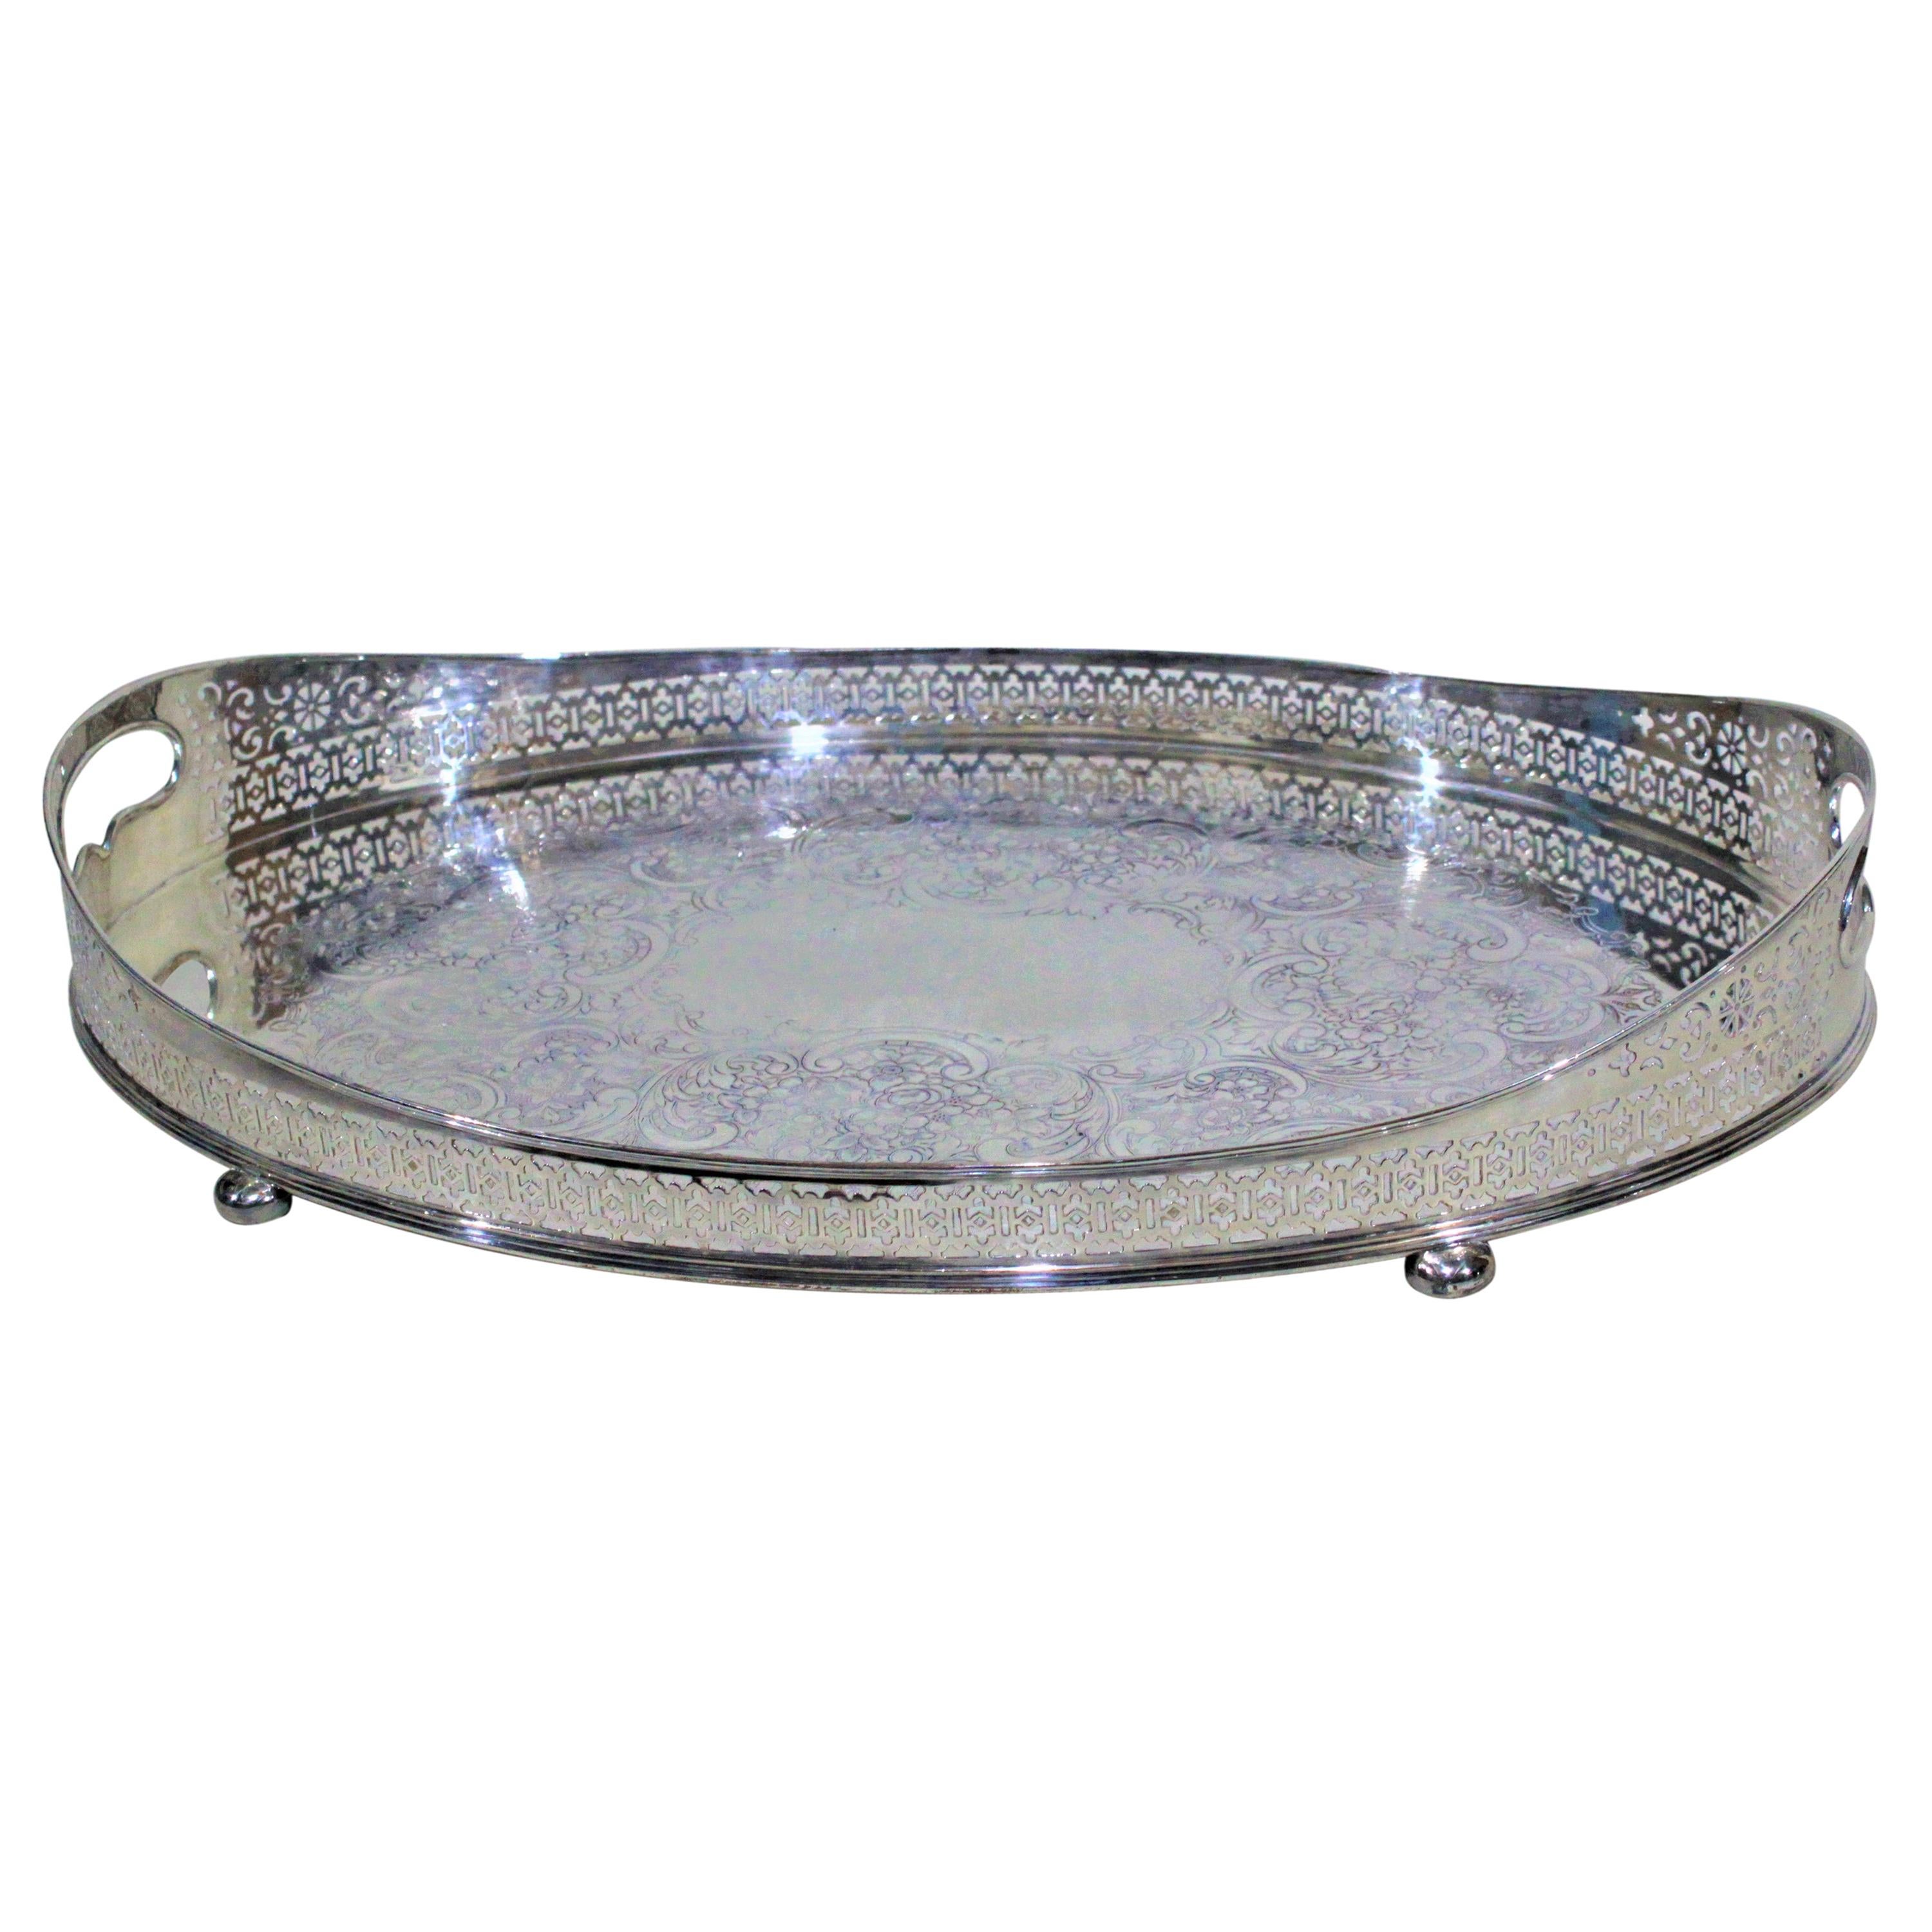 Large Antique Oval Silver Plated Gallery Serving Tray For Sale at 1stDibs |  antique oval silver tray, silver plated gallery tray, silver trays for sale